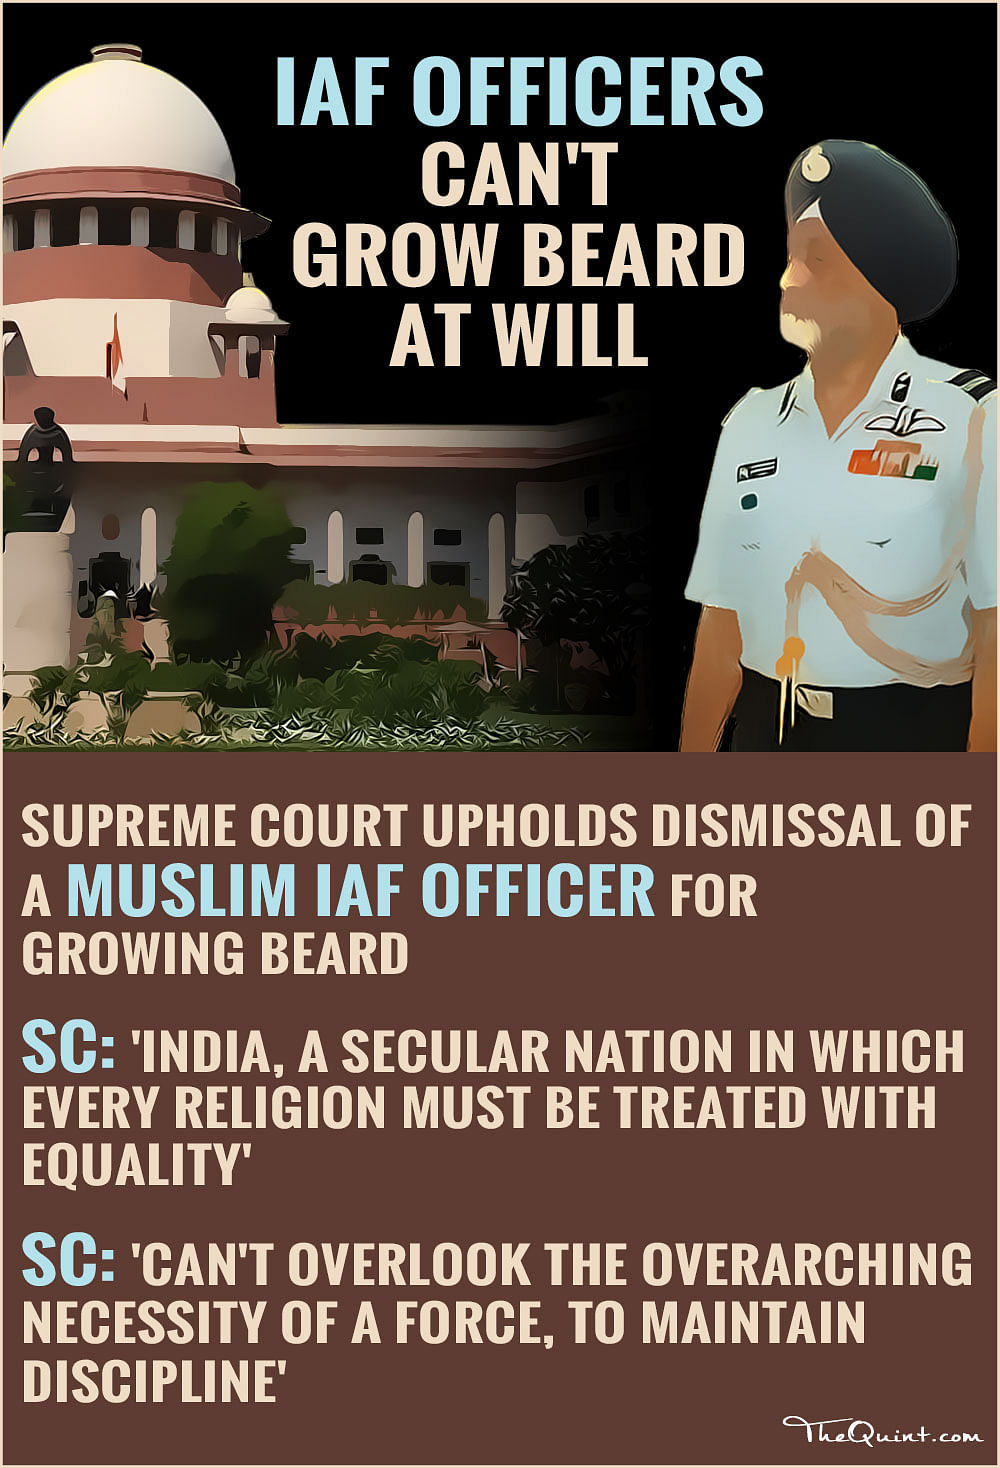 Supreme Court justifying ‘no beard’ rule for Muslim IAF officers leaves question about religious freedom unanswered.